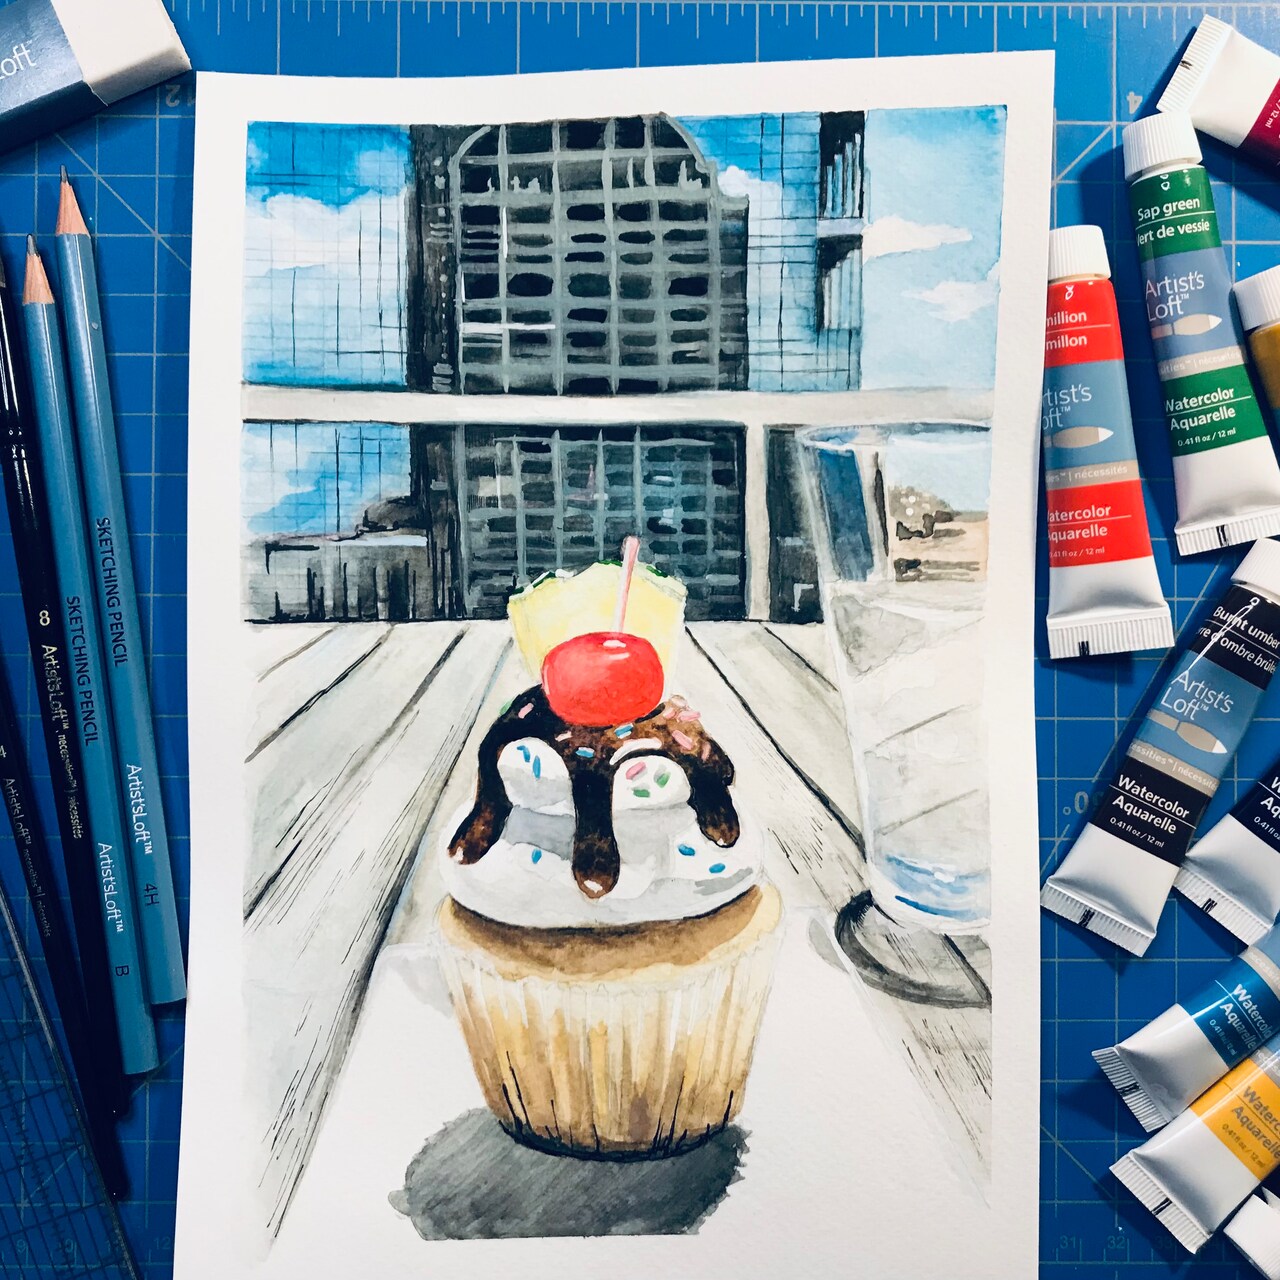 Painting a One-Point Perspective Cupcake, Part II